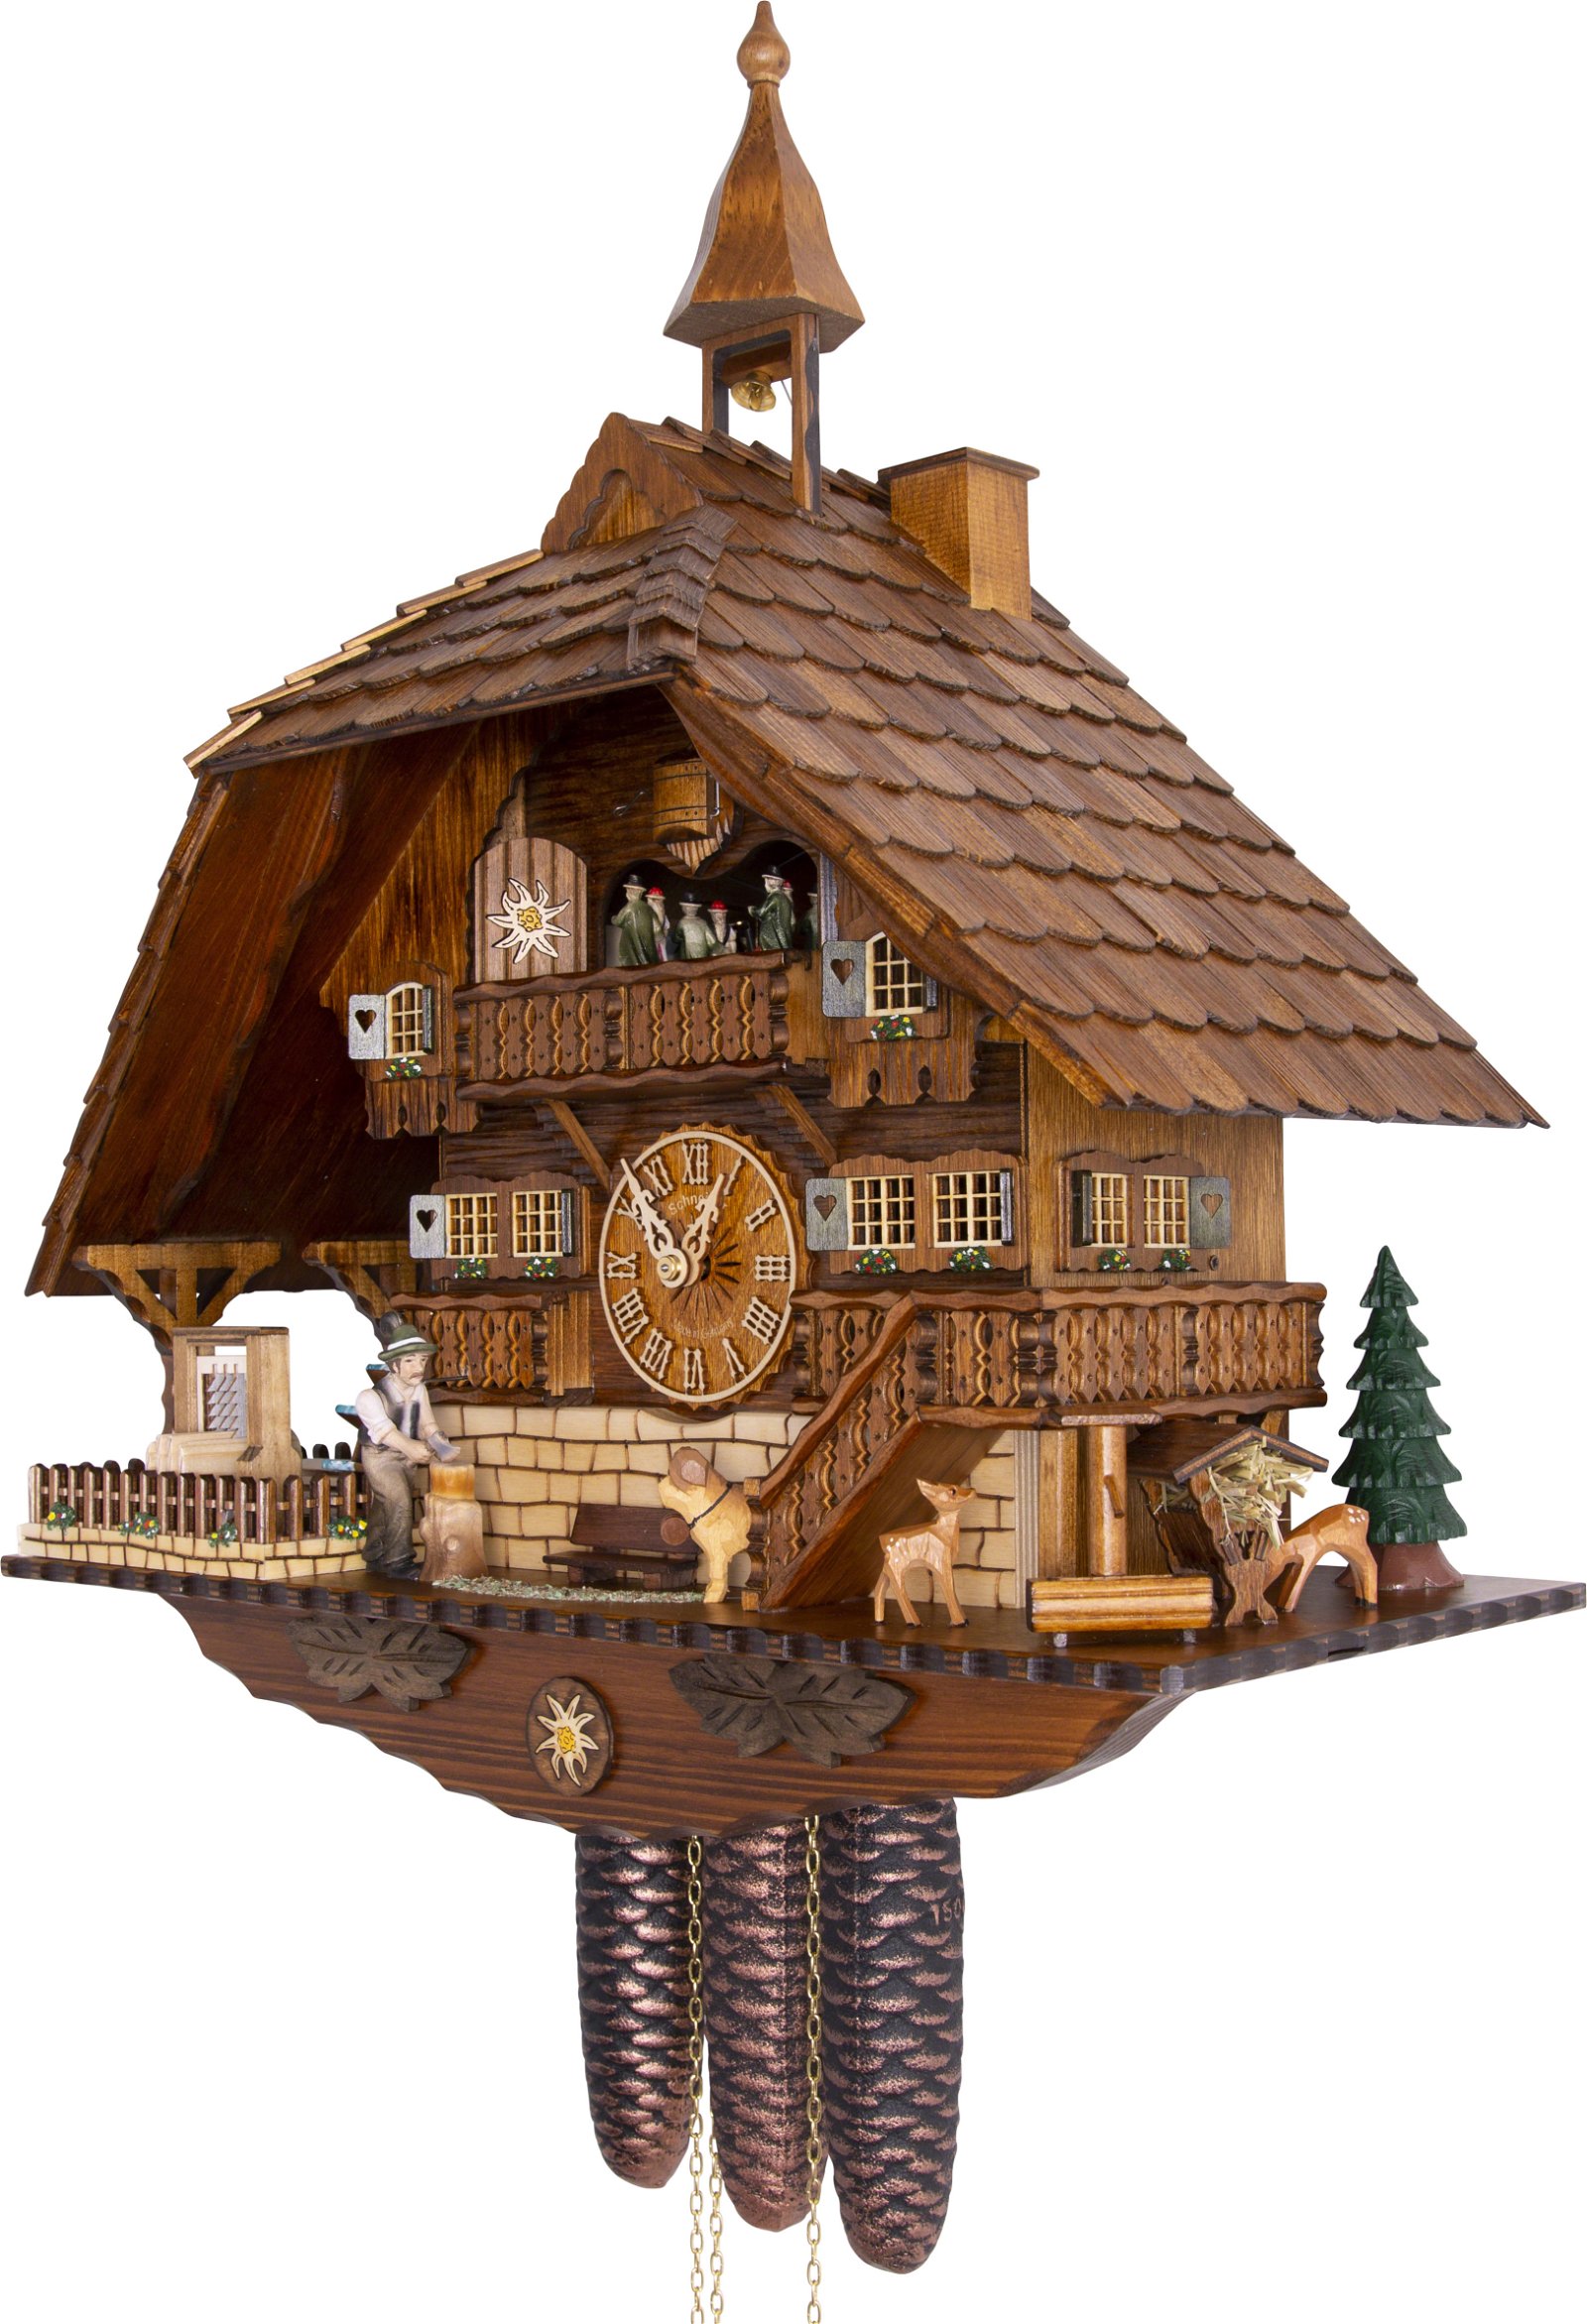 Trenkle Quarter call cuckoo clock with 1-day movement Swiss House TU 623 